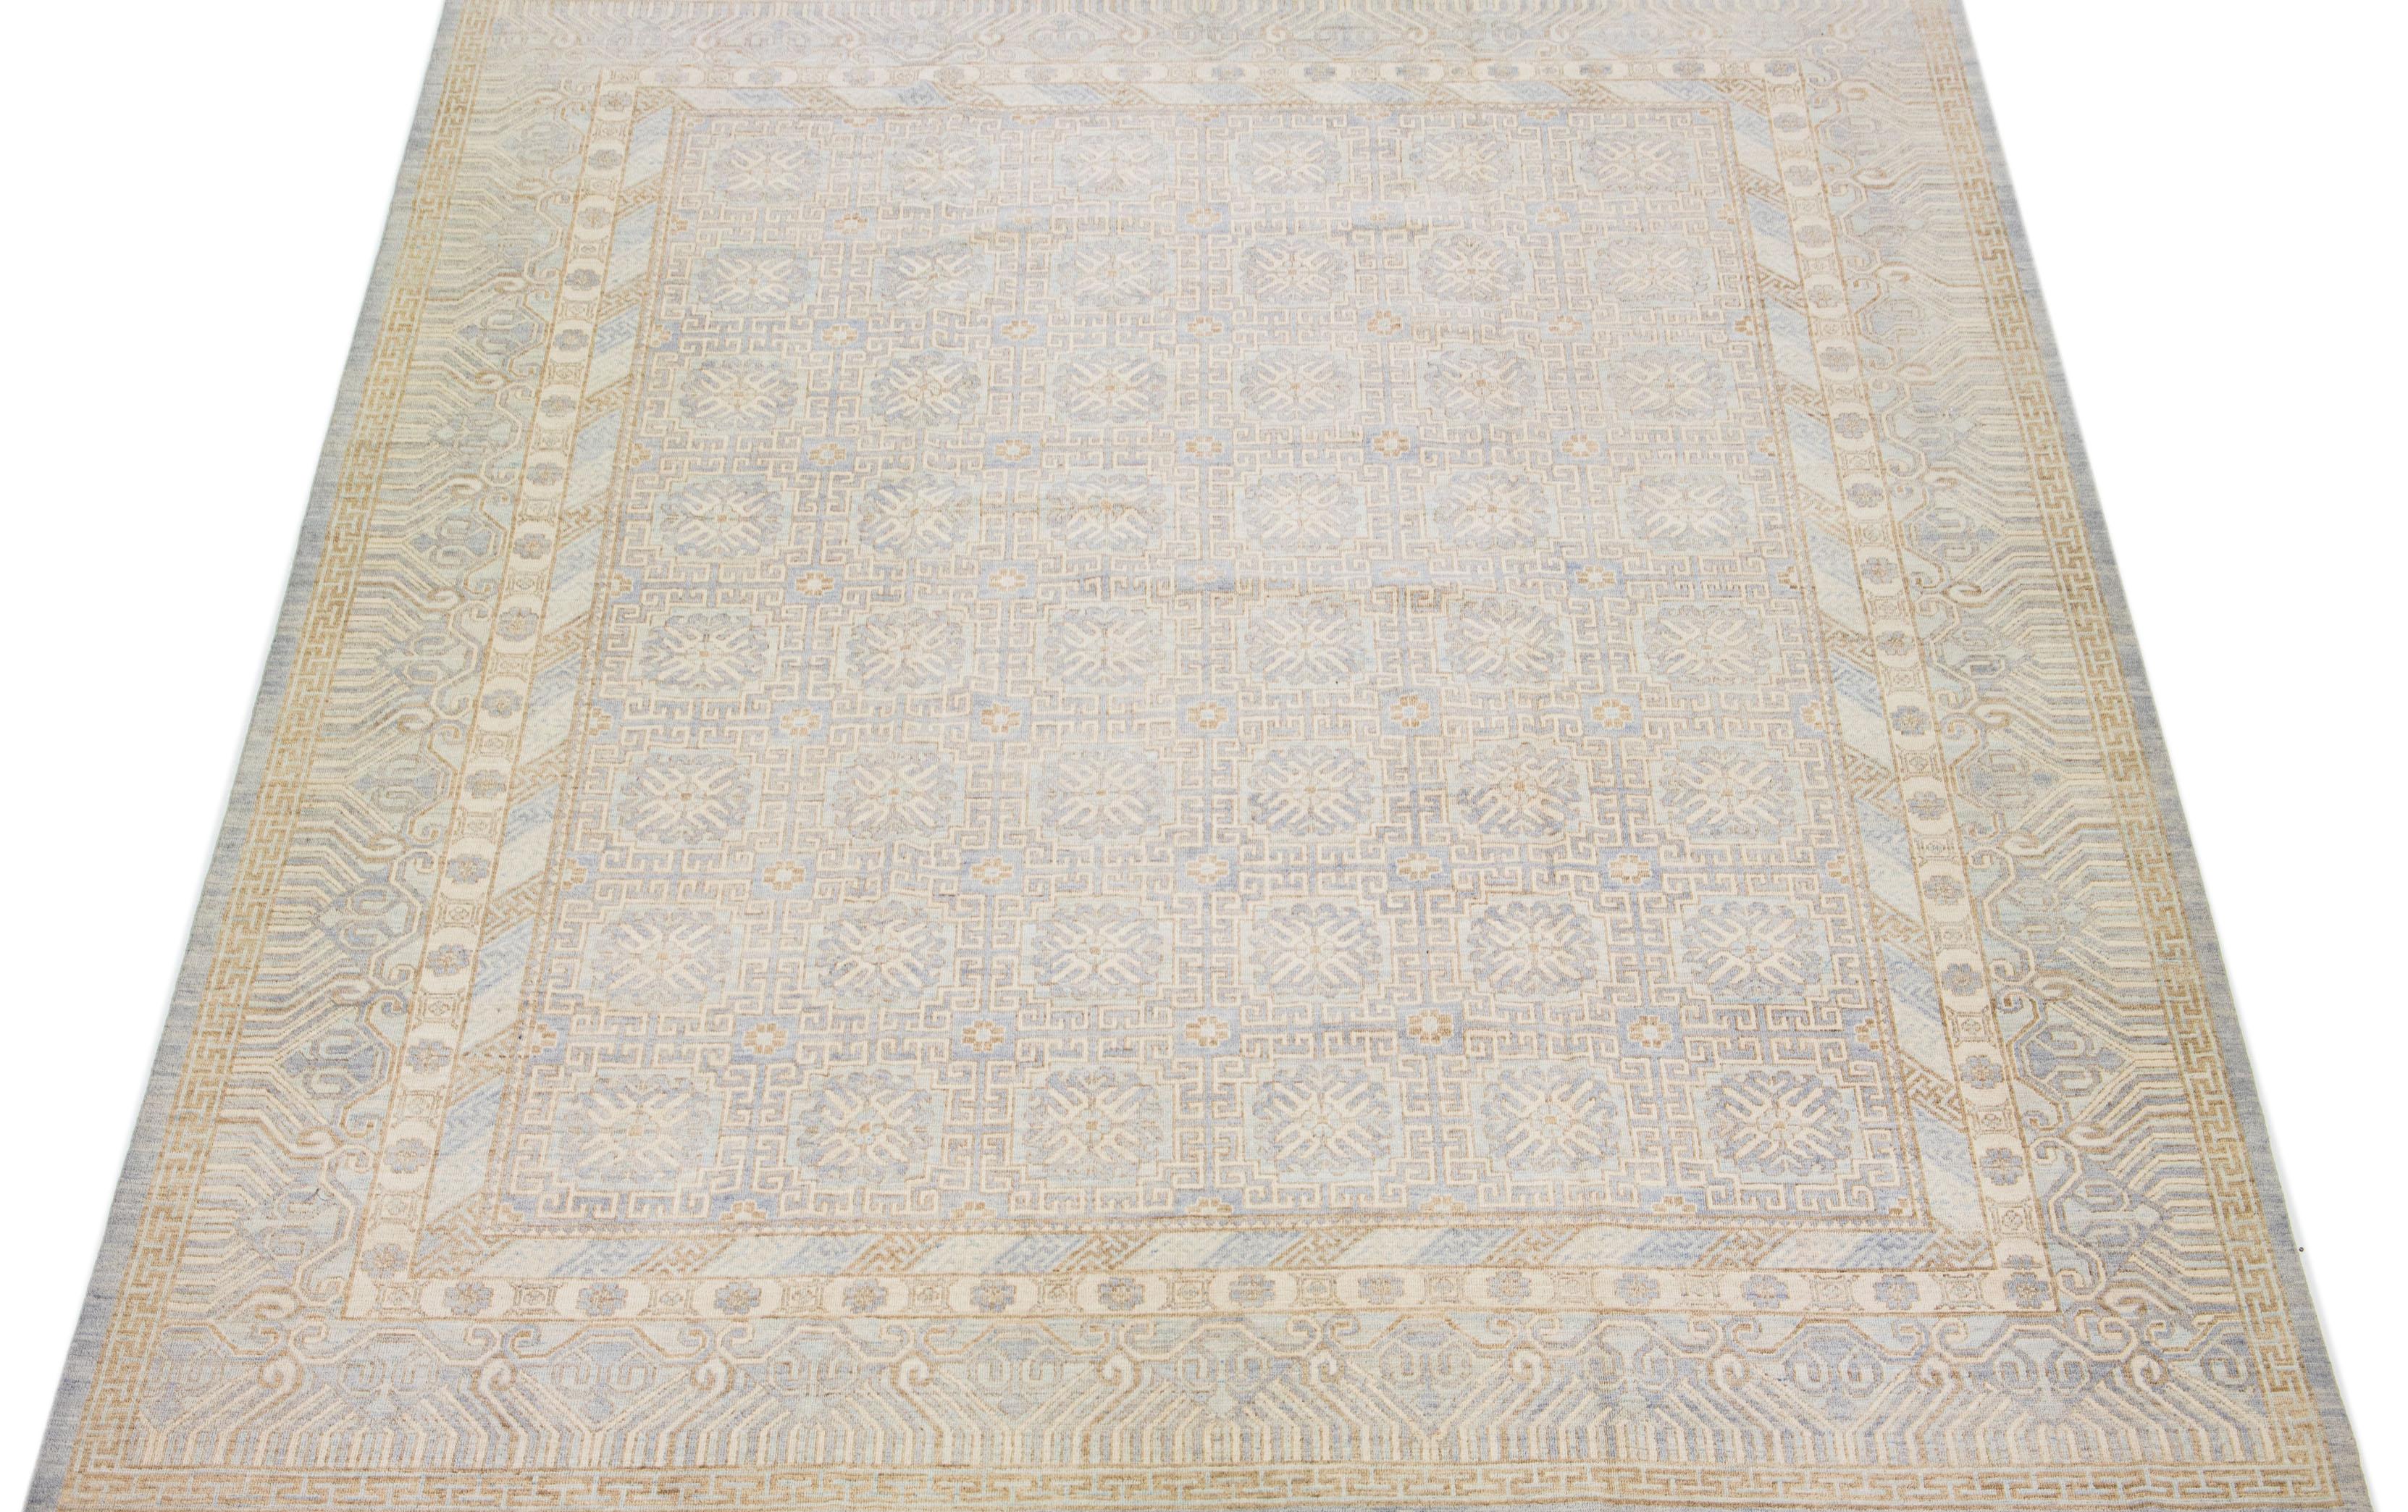 This modern wool rug from India features a striking oversize design, highlighted by a rich beige field and elaborate blue and gray floral motifs with geometric details.

This rug measure: 12' 3” x 15'.